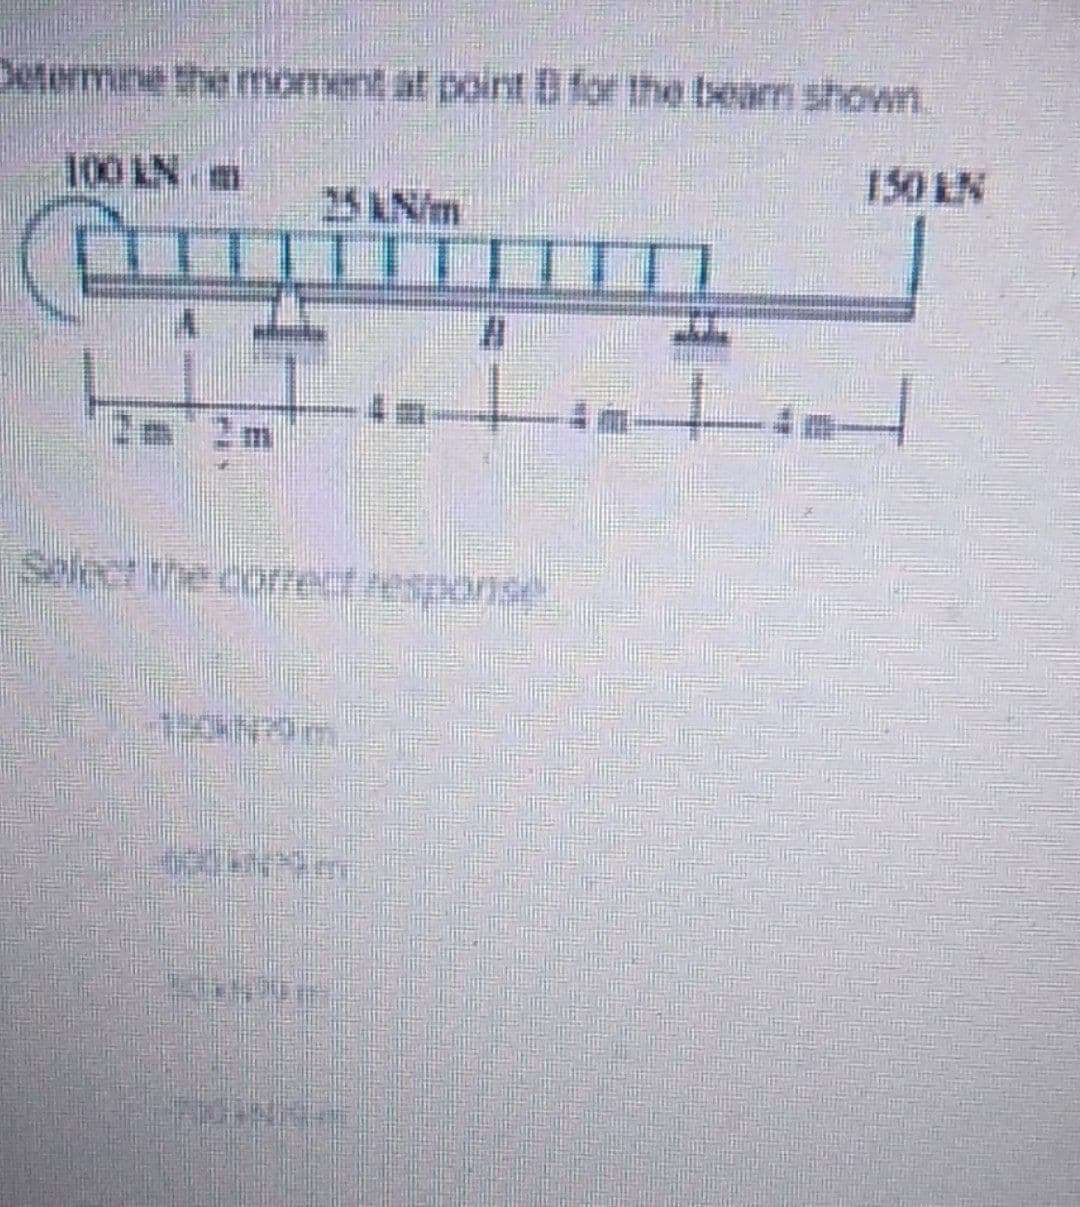 Determne the moment at point B for the bearri shown.
100 LN m
150 LN
25AN/m
Select the comelt respanse .
3.
